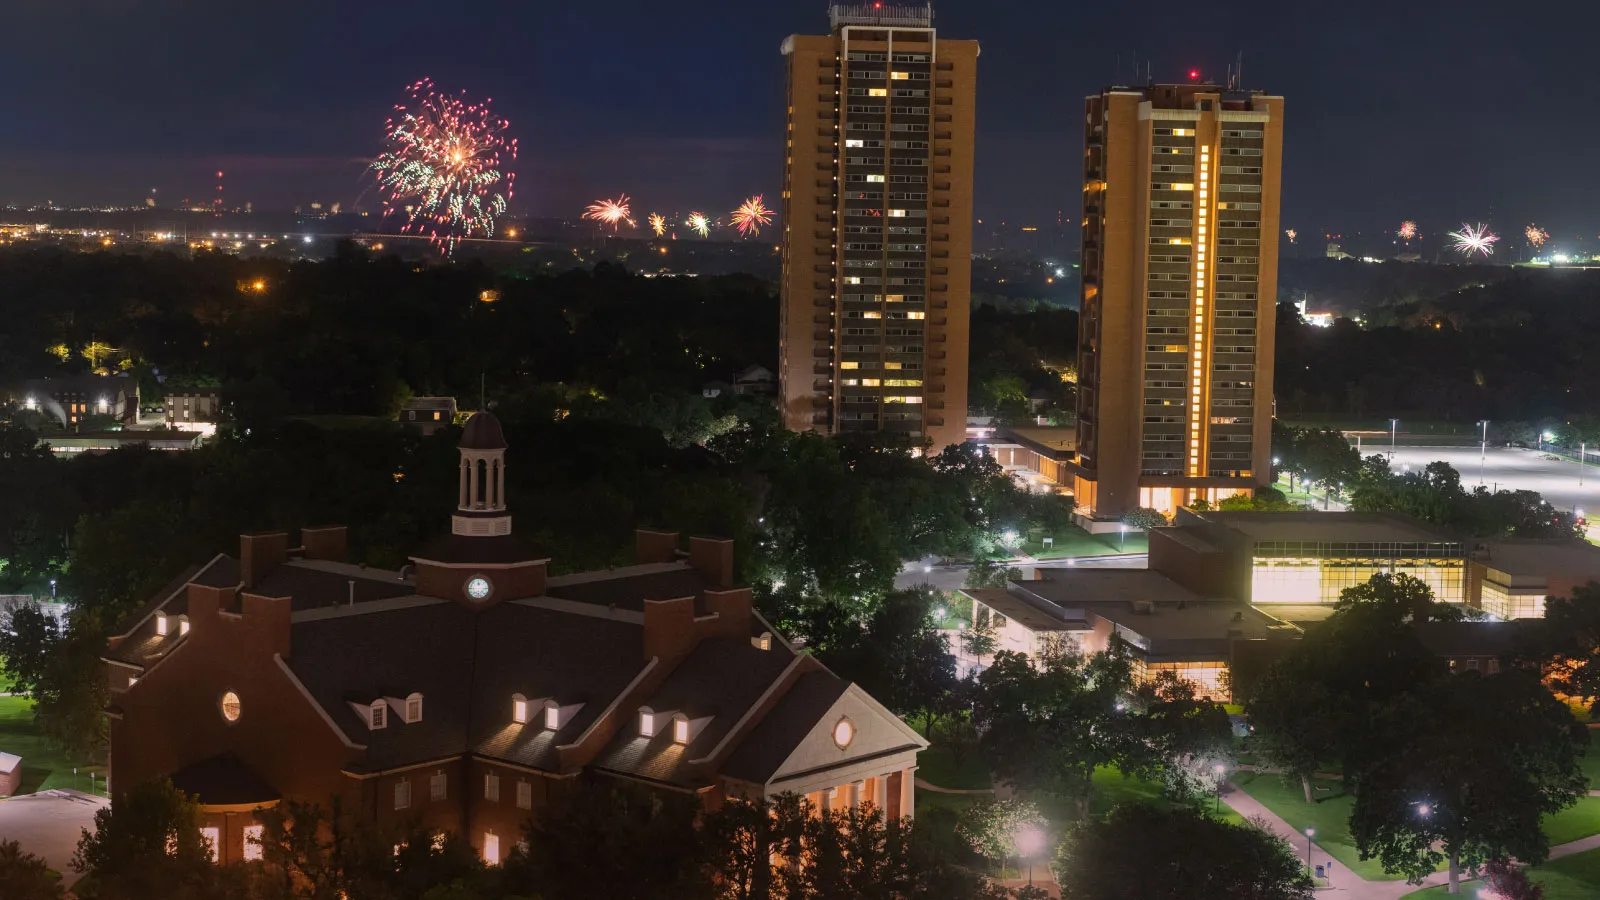 TWU's Denton Campus with Fireworks in the Background